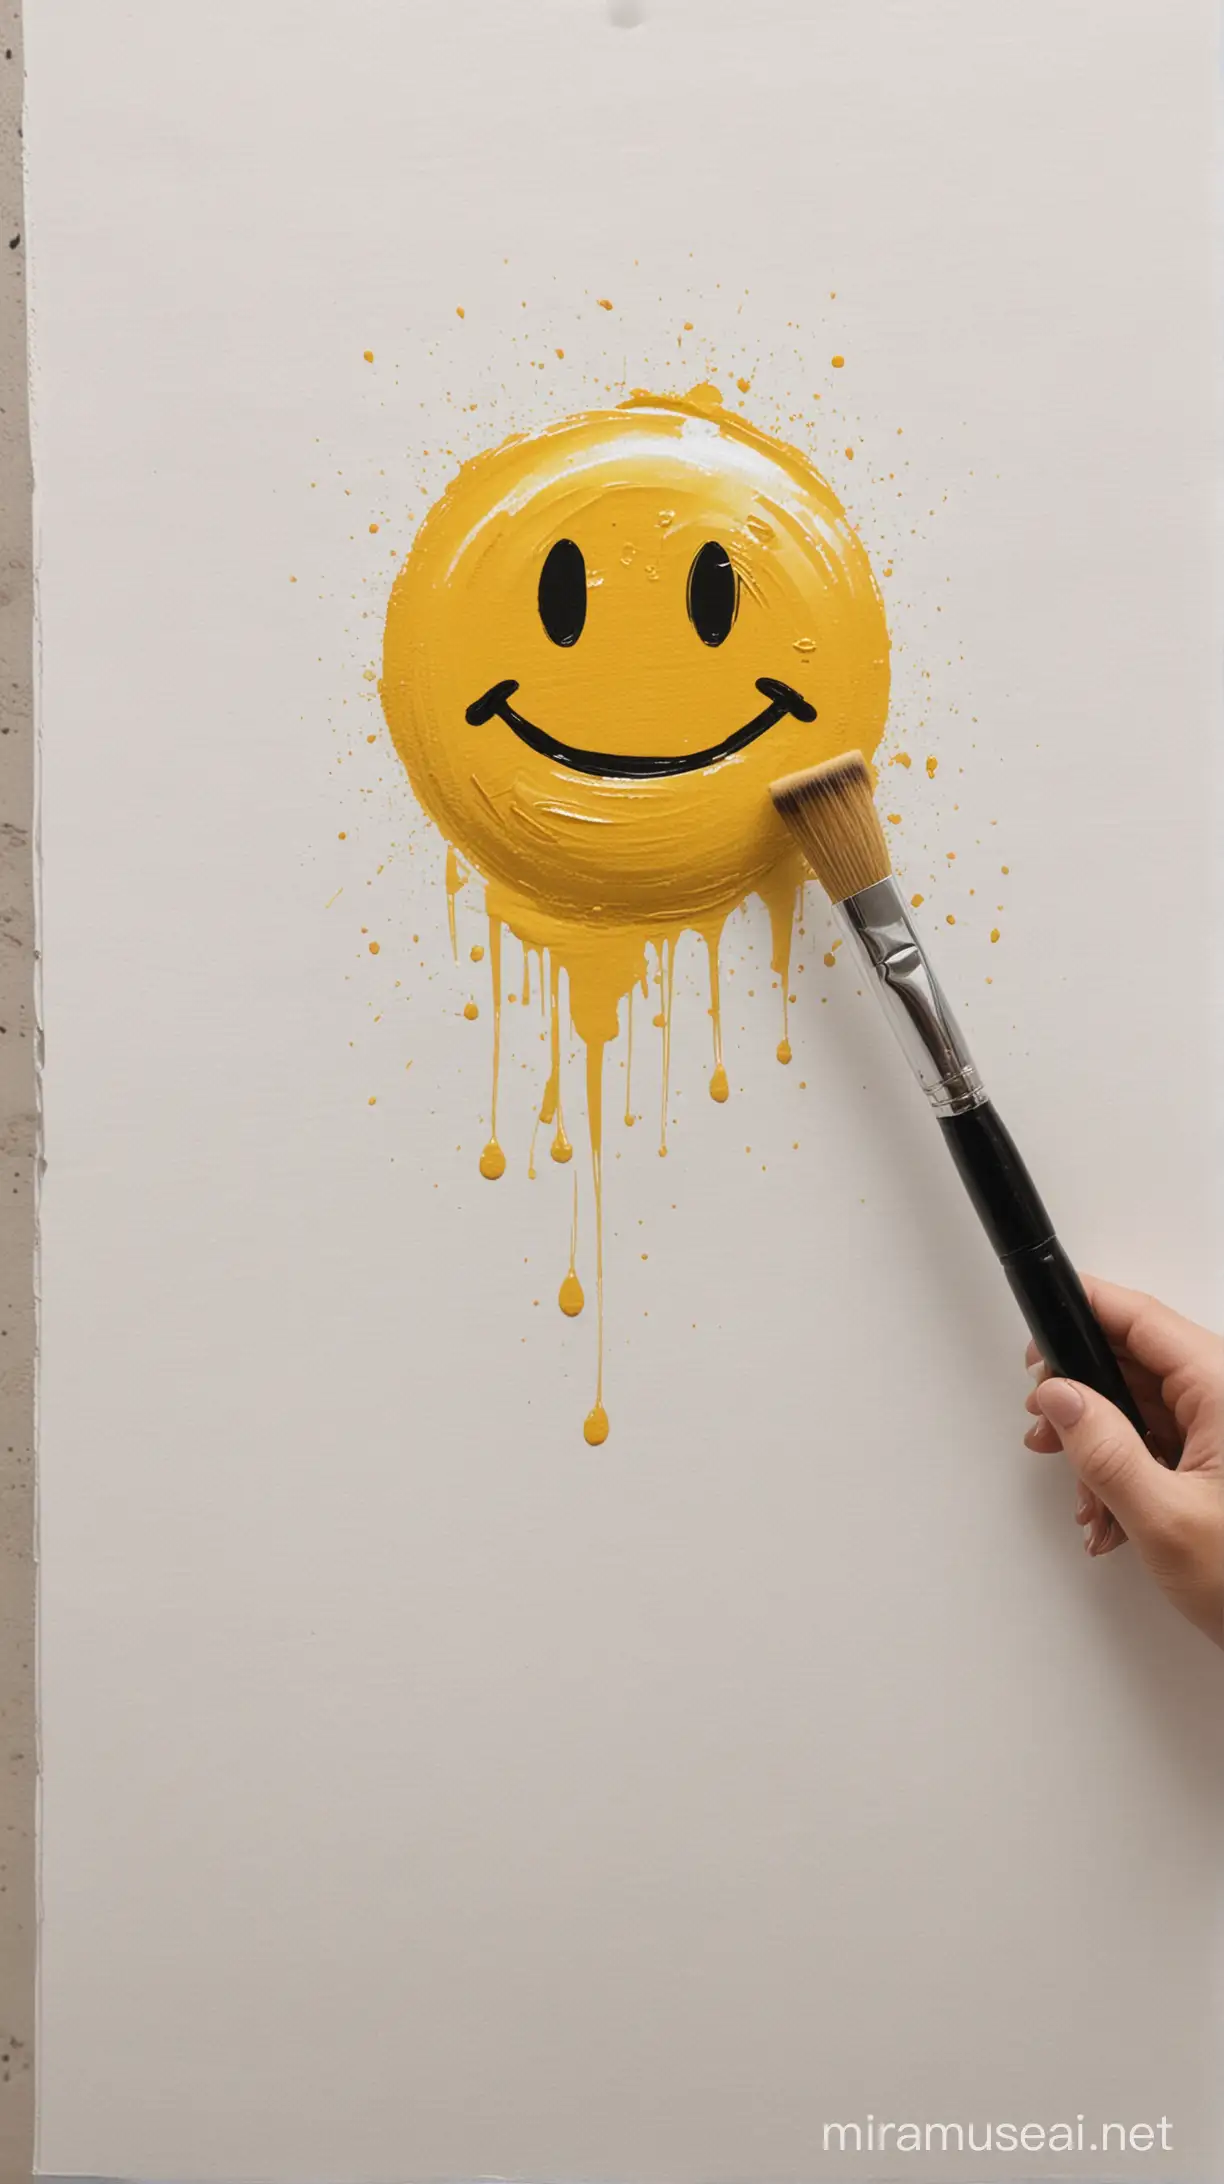 Smiley Face Being Painted with a Brush